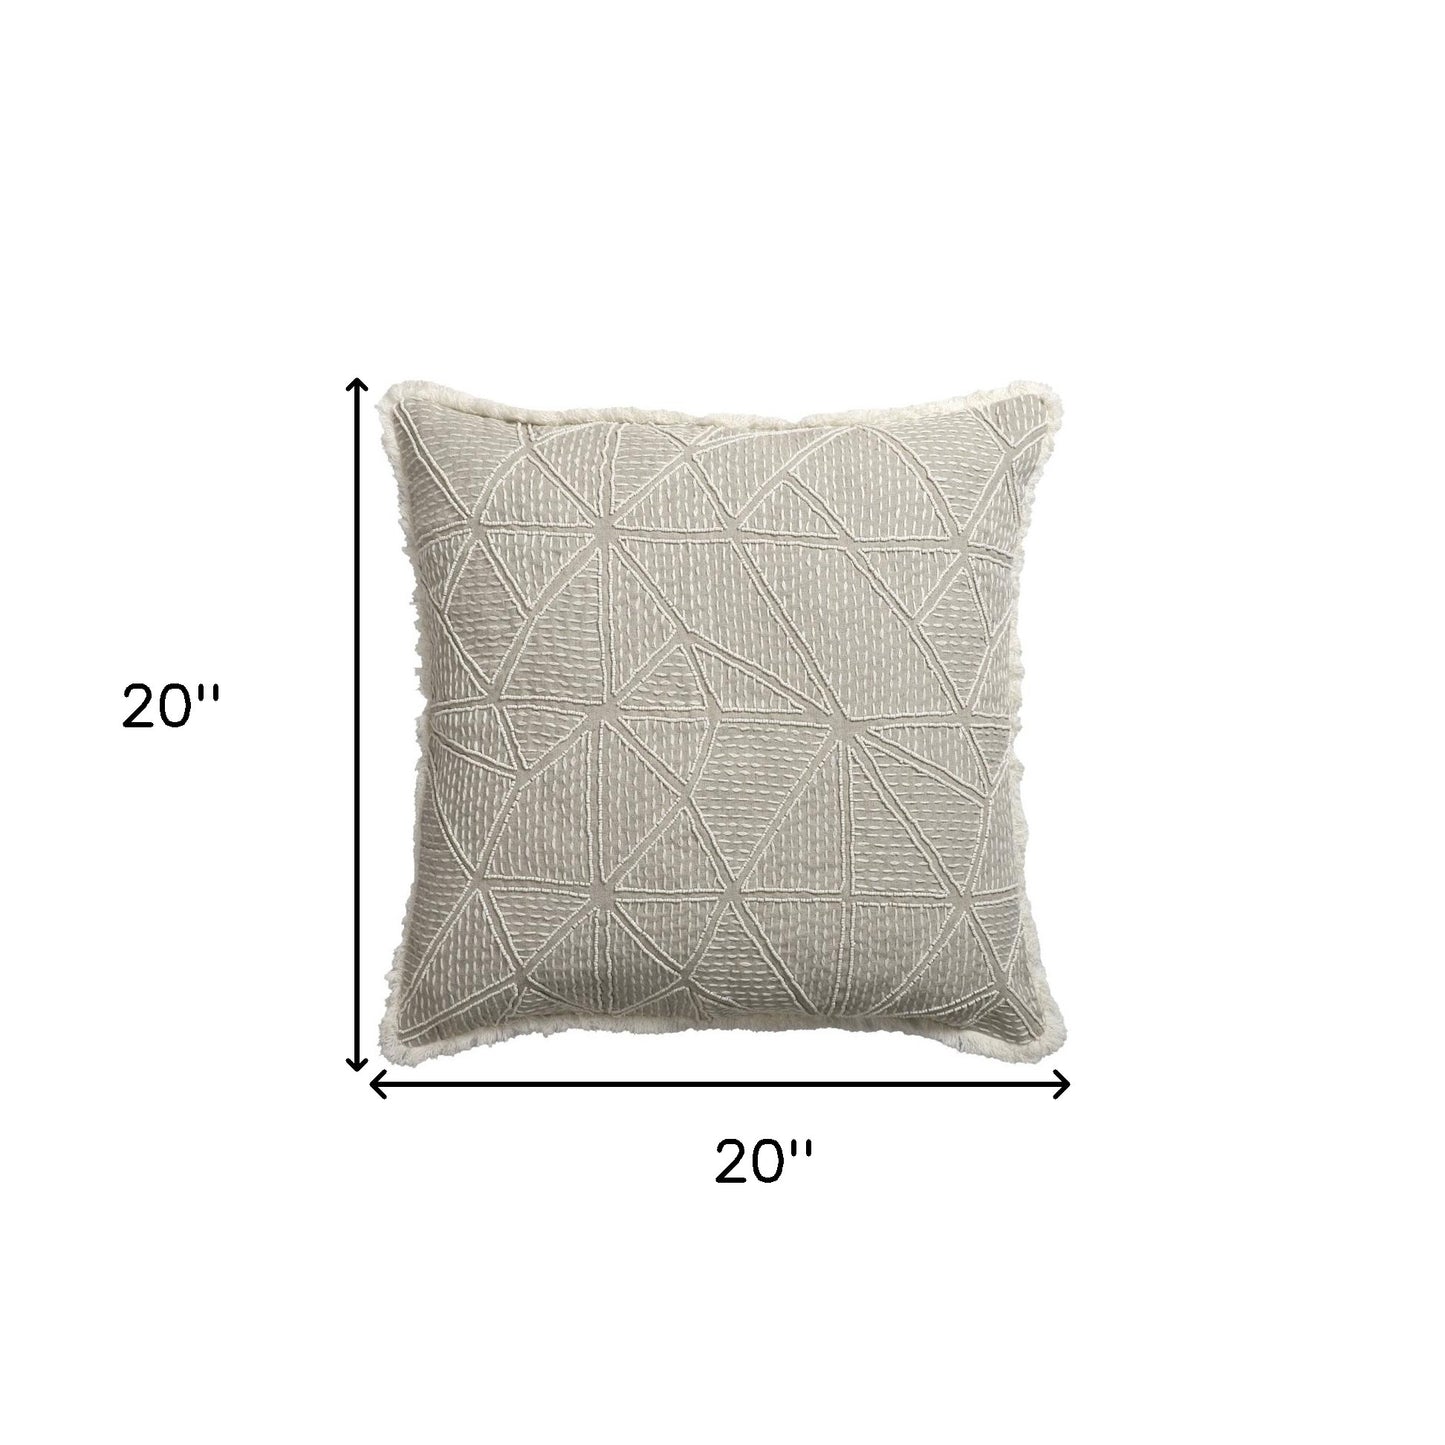 20" X 20" Beige and Ivory Geometric Linen Zippered Pillow With Embroidery, Fringe